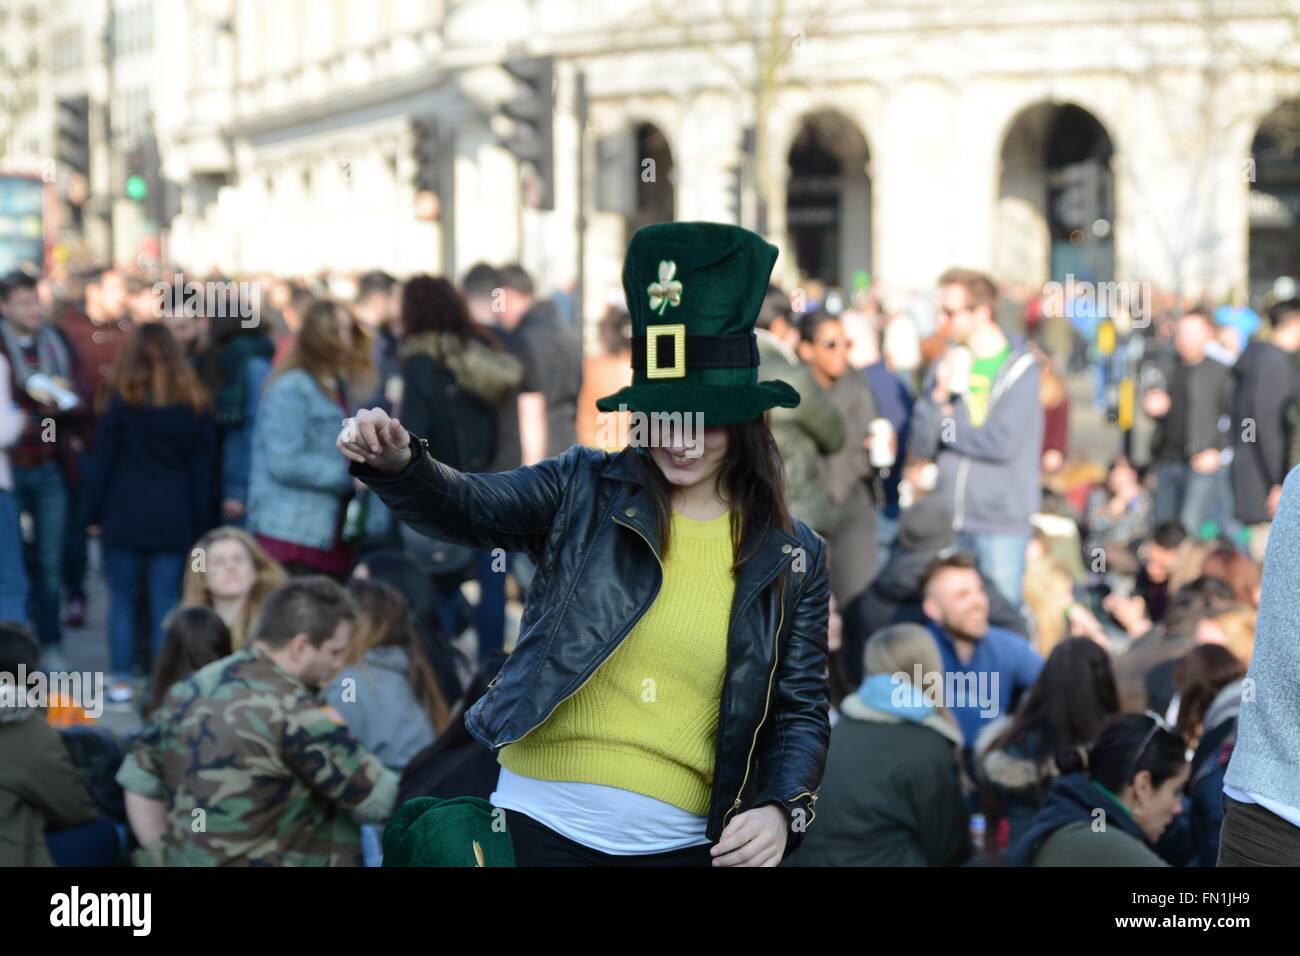 London, UK. 13th March 2016. Party-goers dance outside Trafalgar Square in London. Credit: Marc Ward/Alamy Live News Stock Photo